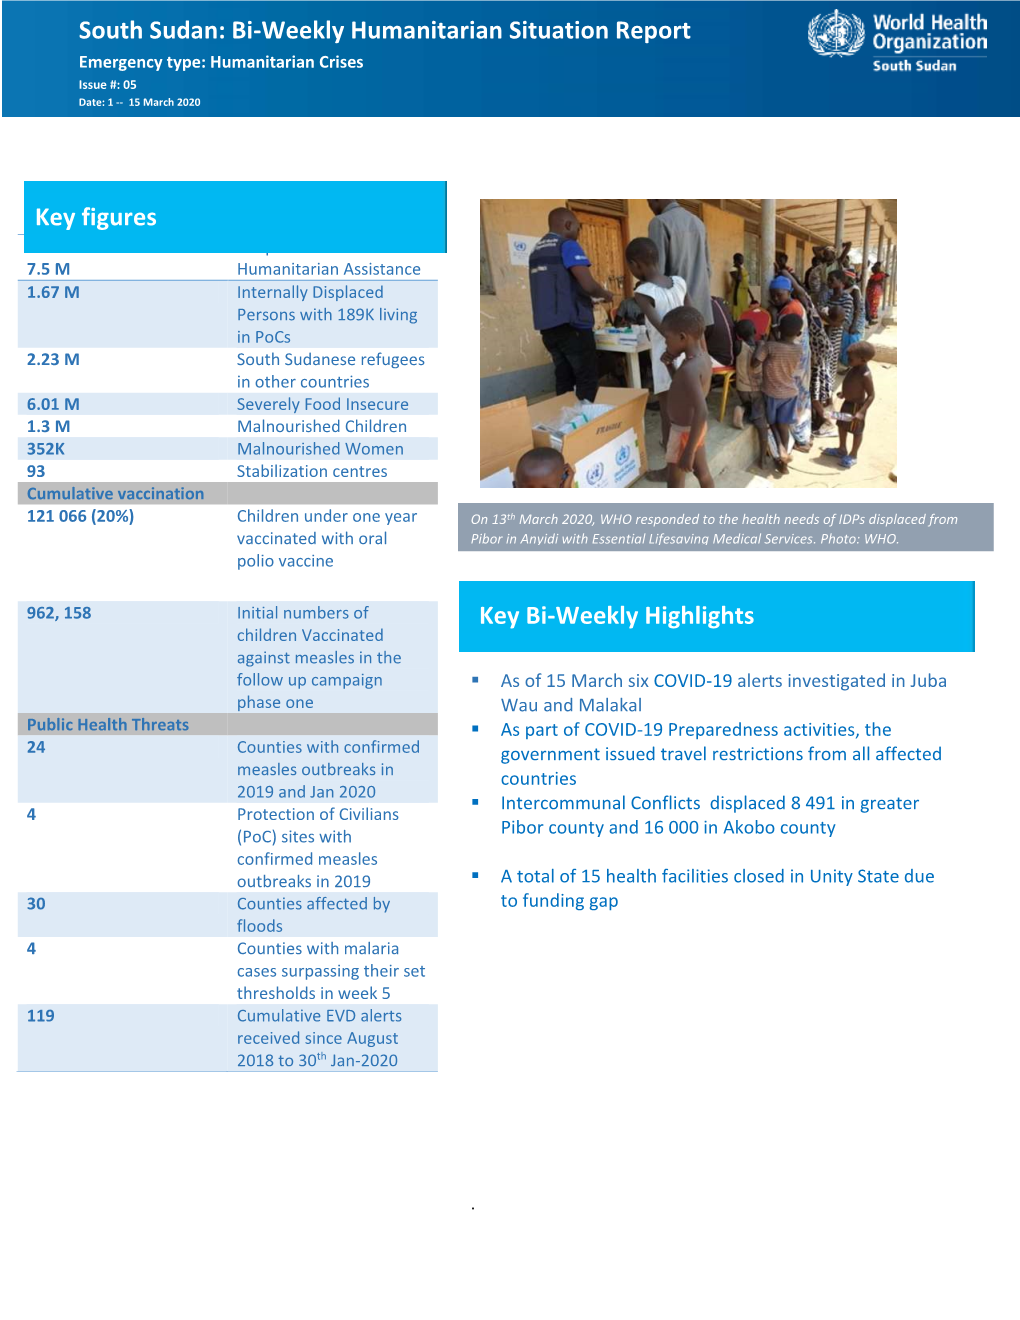 South Sudan: Bi-Weekly Humanitarian Situation Report Emergency Type: Humanitarian Crises Issue #: 05 Date: 1 -- 15 March 2020